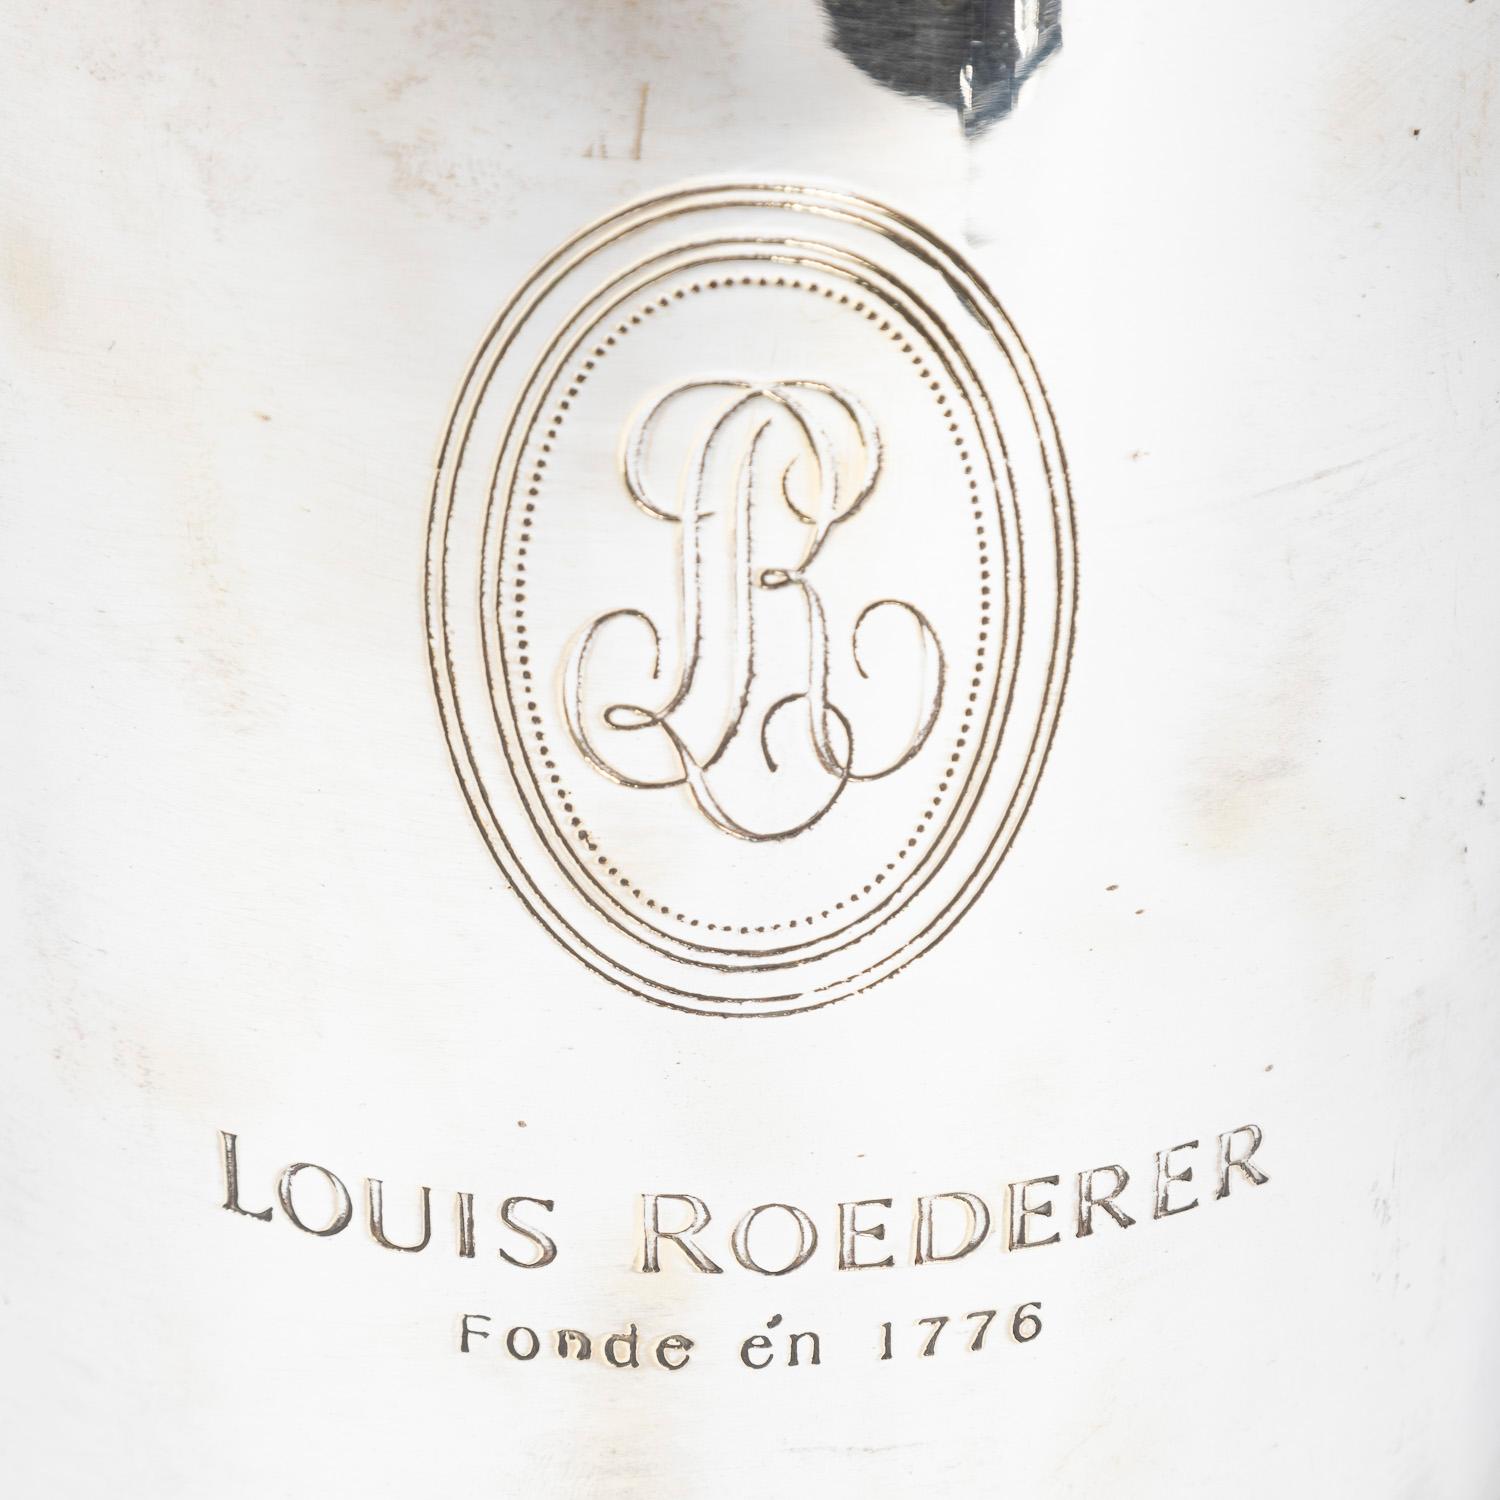 European Silver Plated Champagne Ice Bucket for Louis Roederer by James Deakin & Sons For Sale